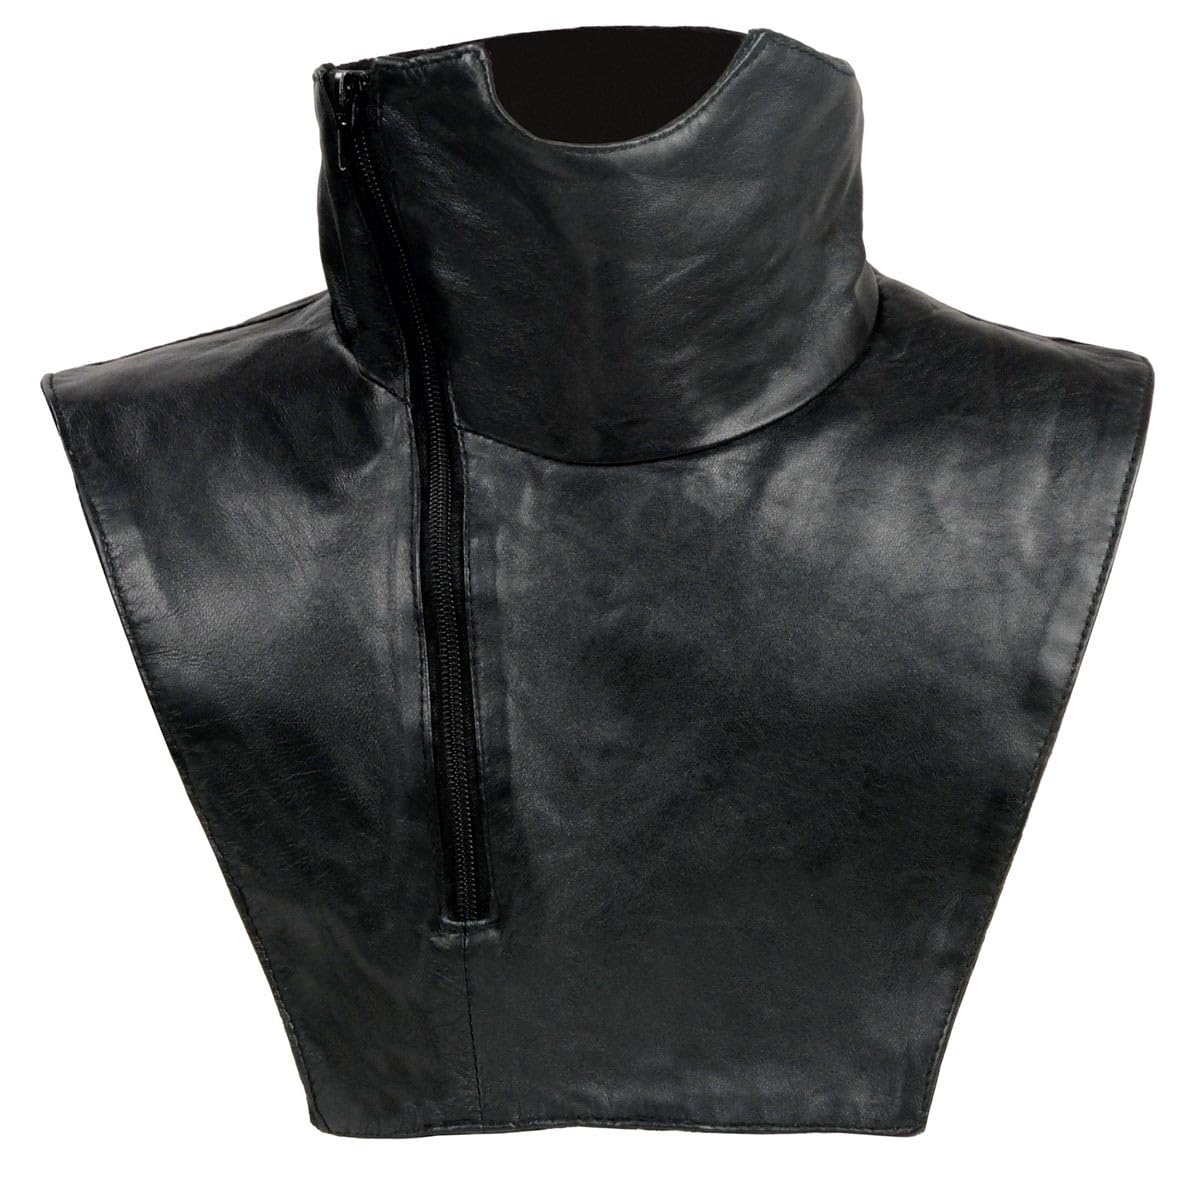 Milwaukee Leather Unisex Black Premium Leather Neck Warmer with Fleece Liners for Cold Weather